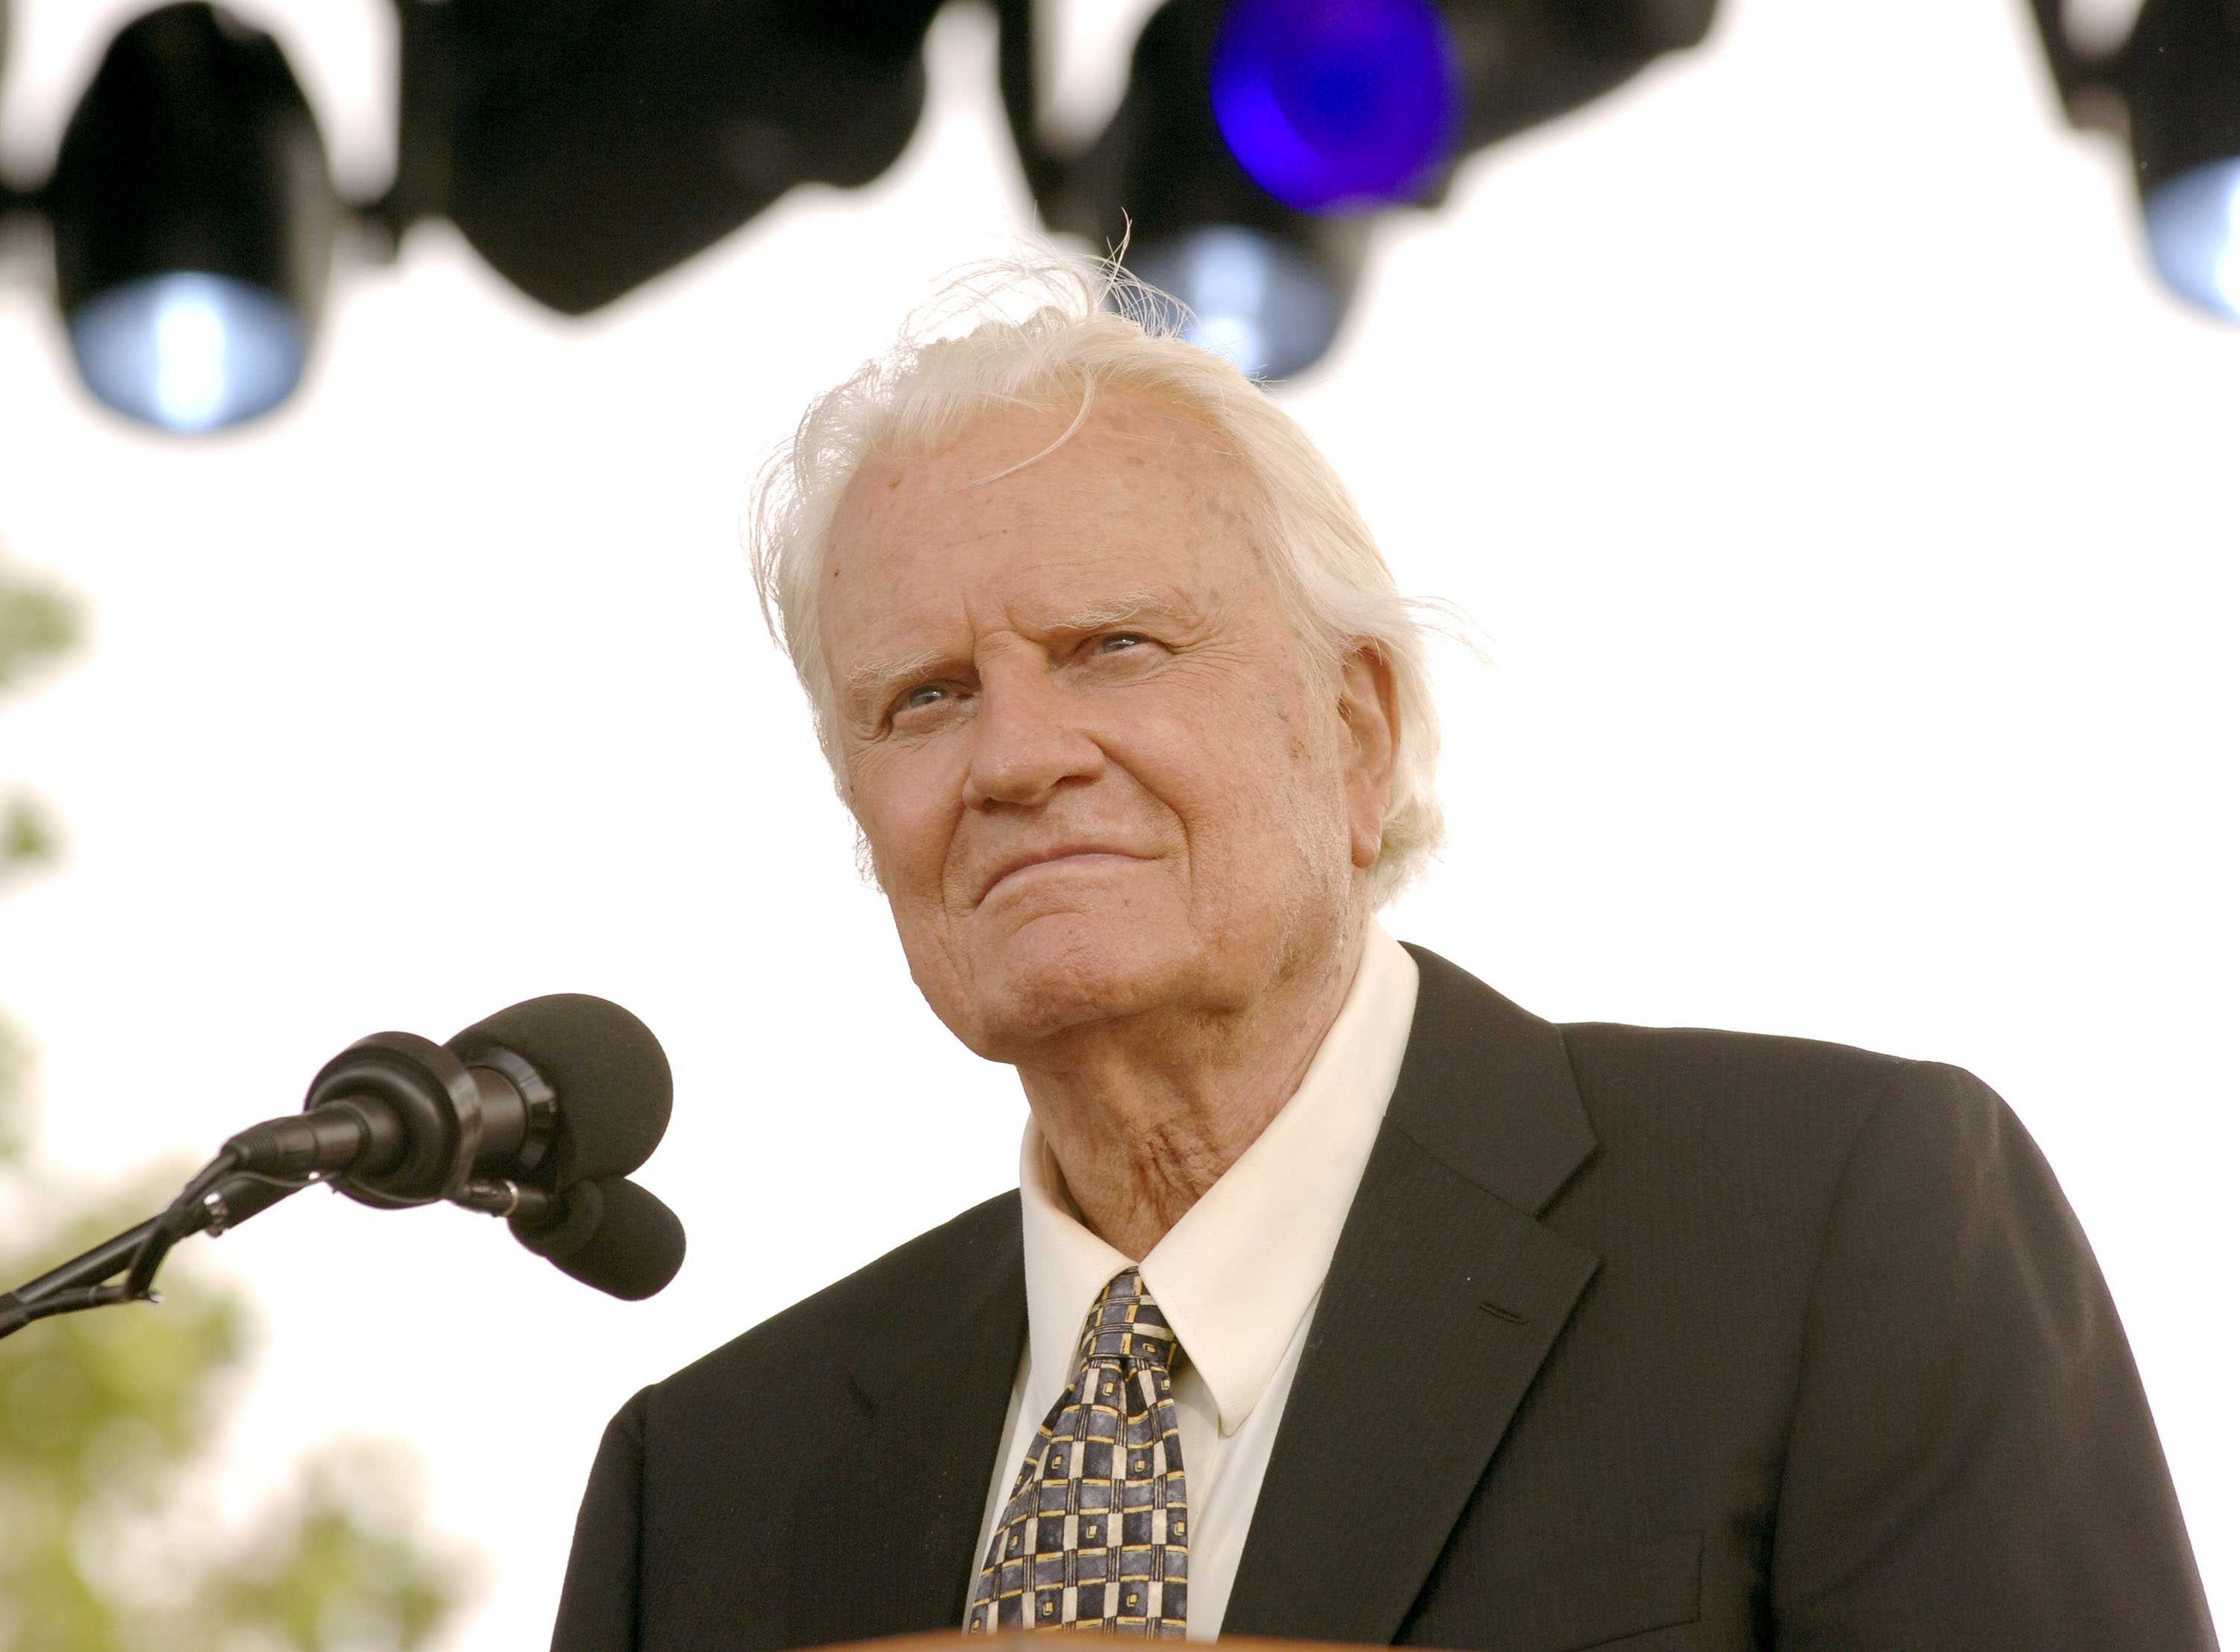 Mourners bid farewell to ‘America’s pastor’ Billy Graham